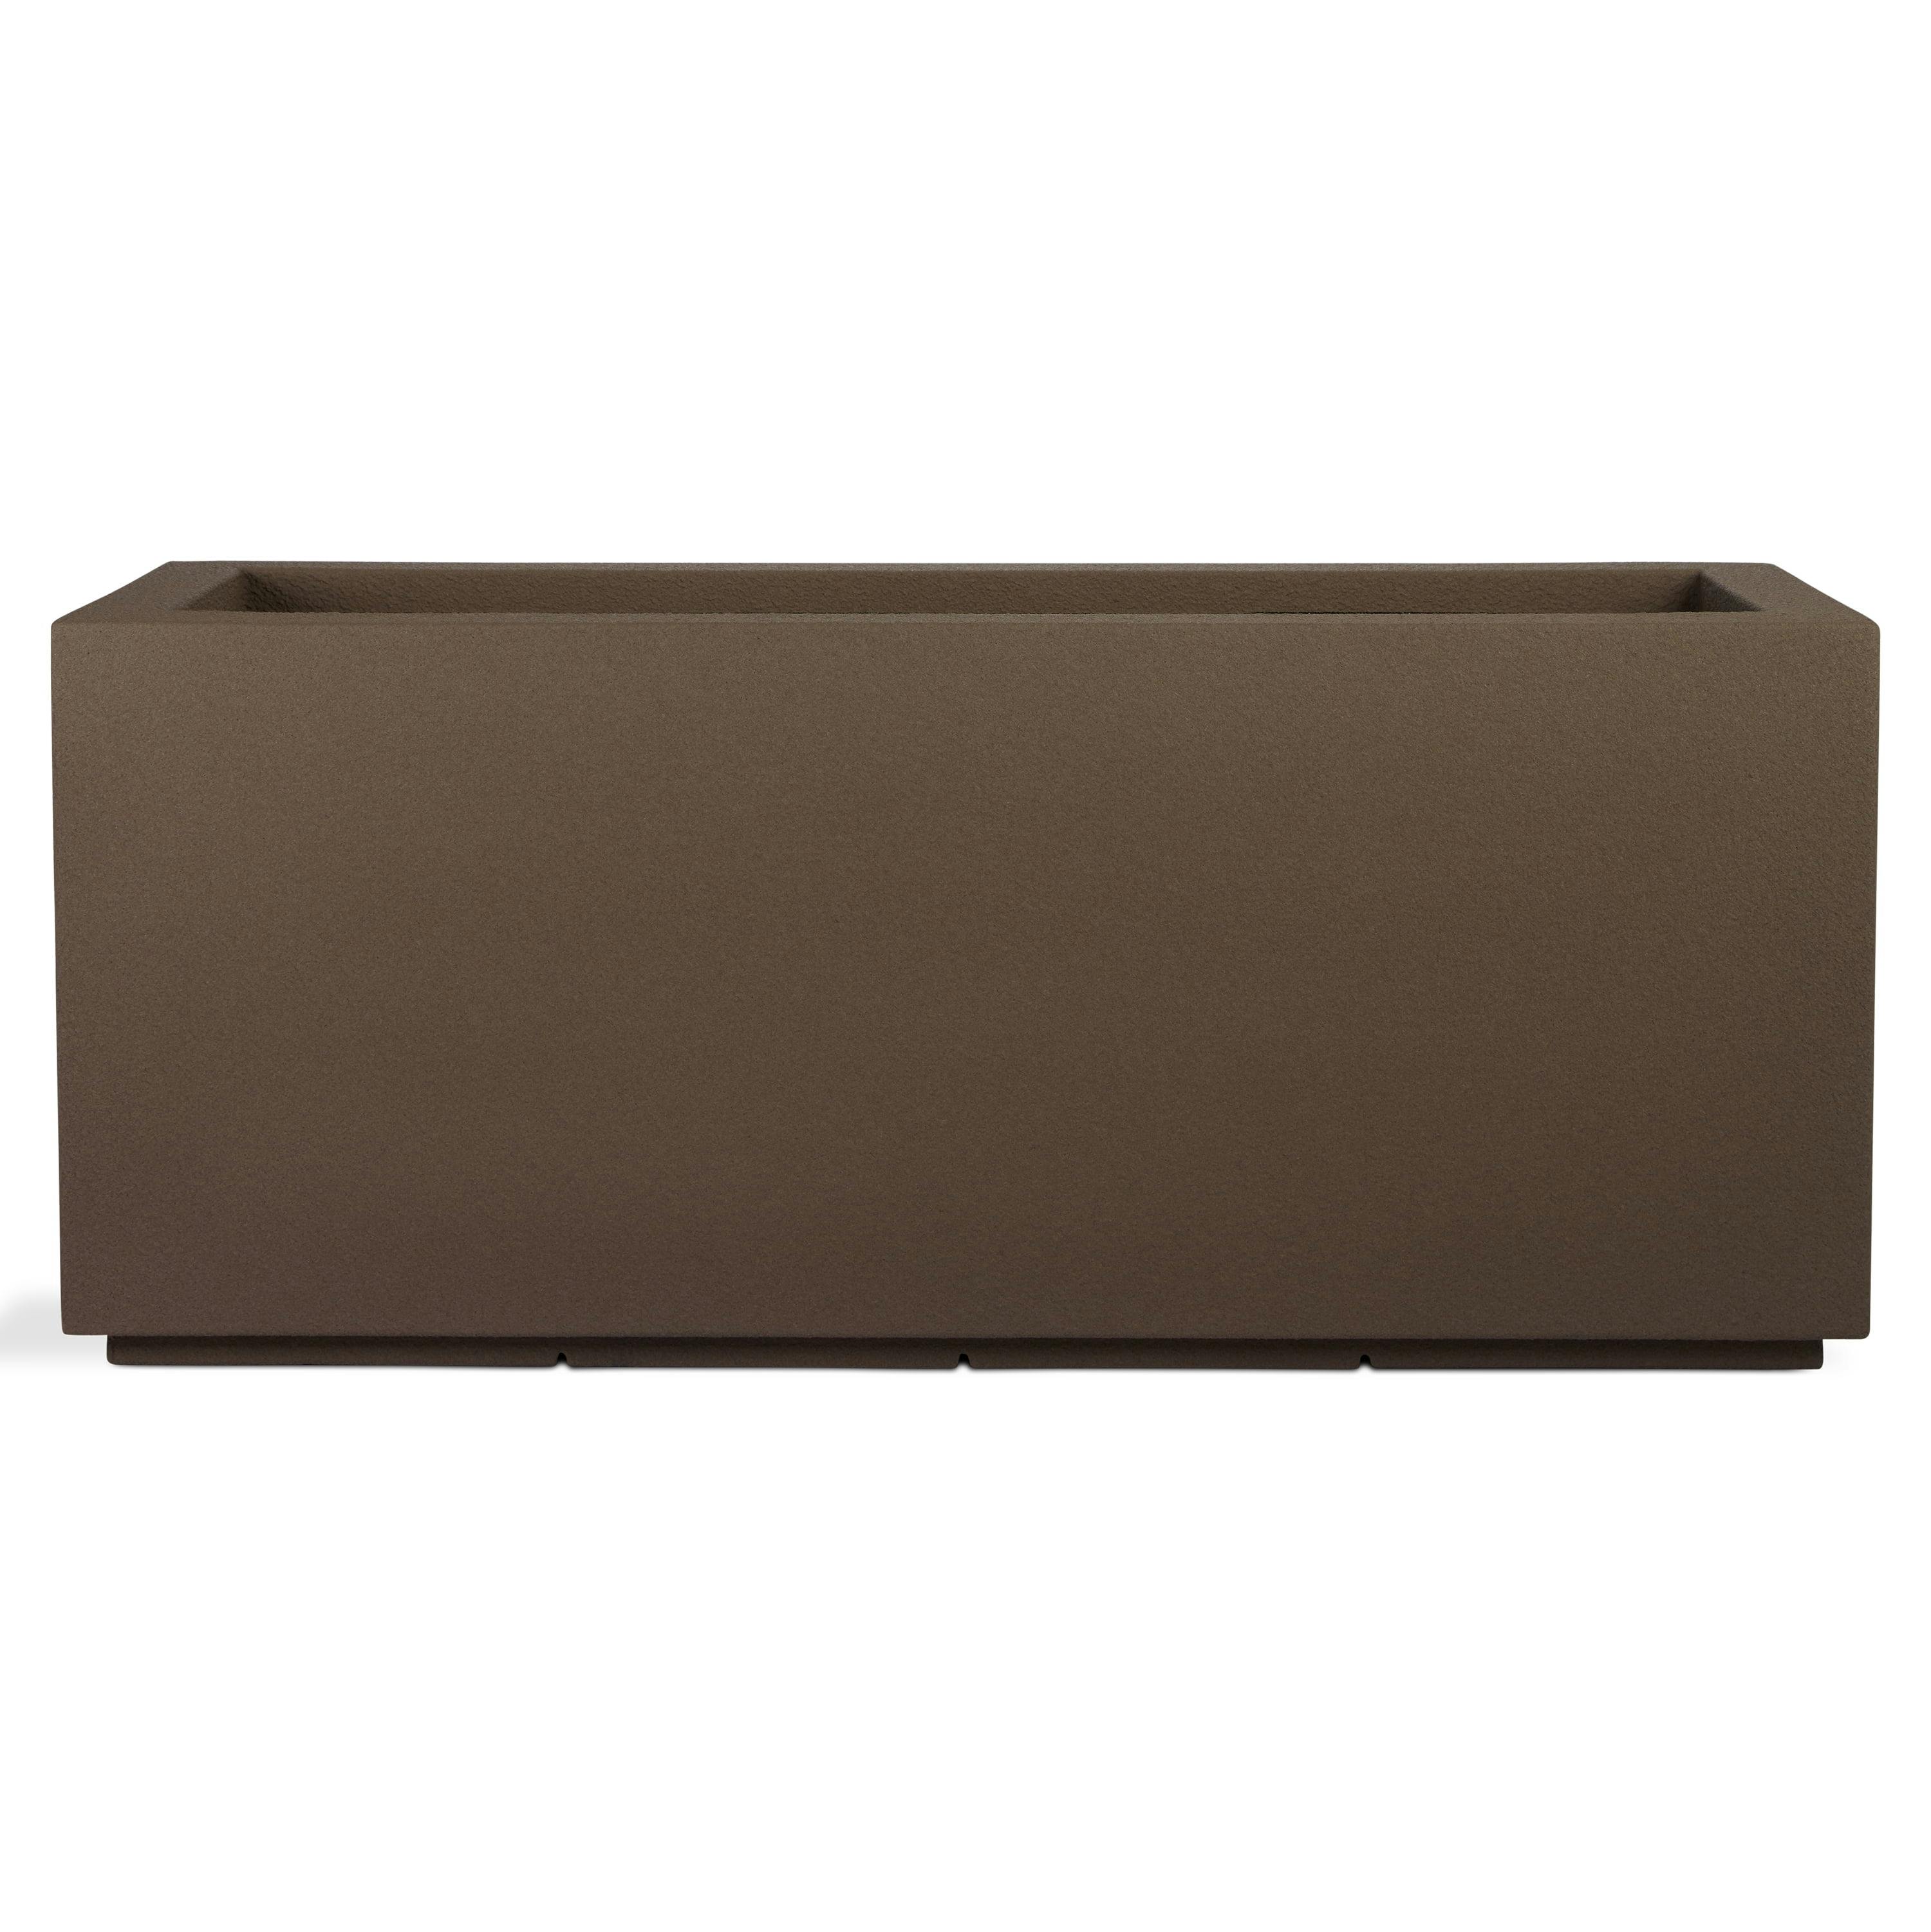 PolyStone Milan Tall Modern Outdoor/Indoor Rectangular Trough Planter, 46" L X 17" W X 19" H, Lightweight, Heavy Duty, Weather Resistant, Polymer Finish, Commercial and Residential (Chocolate Brown)